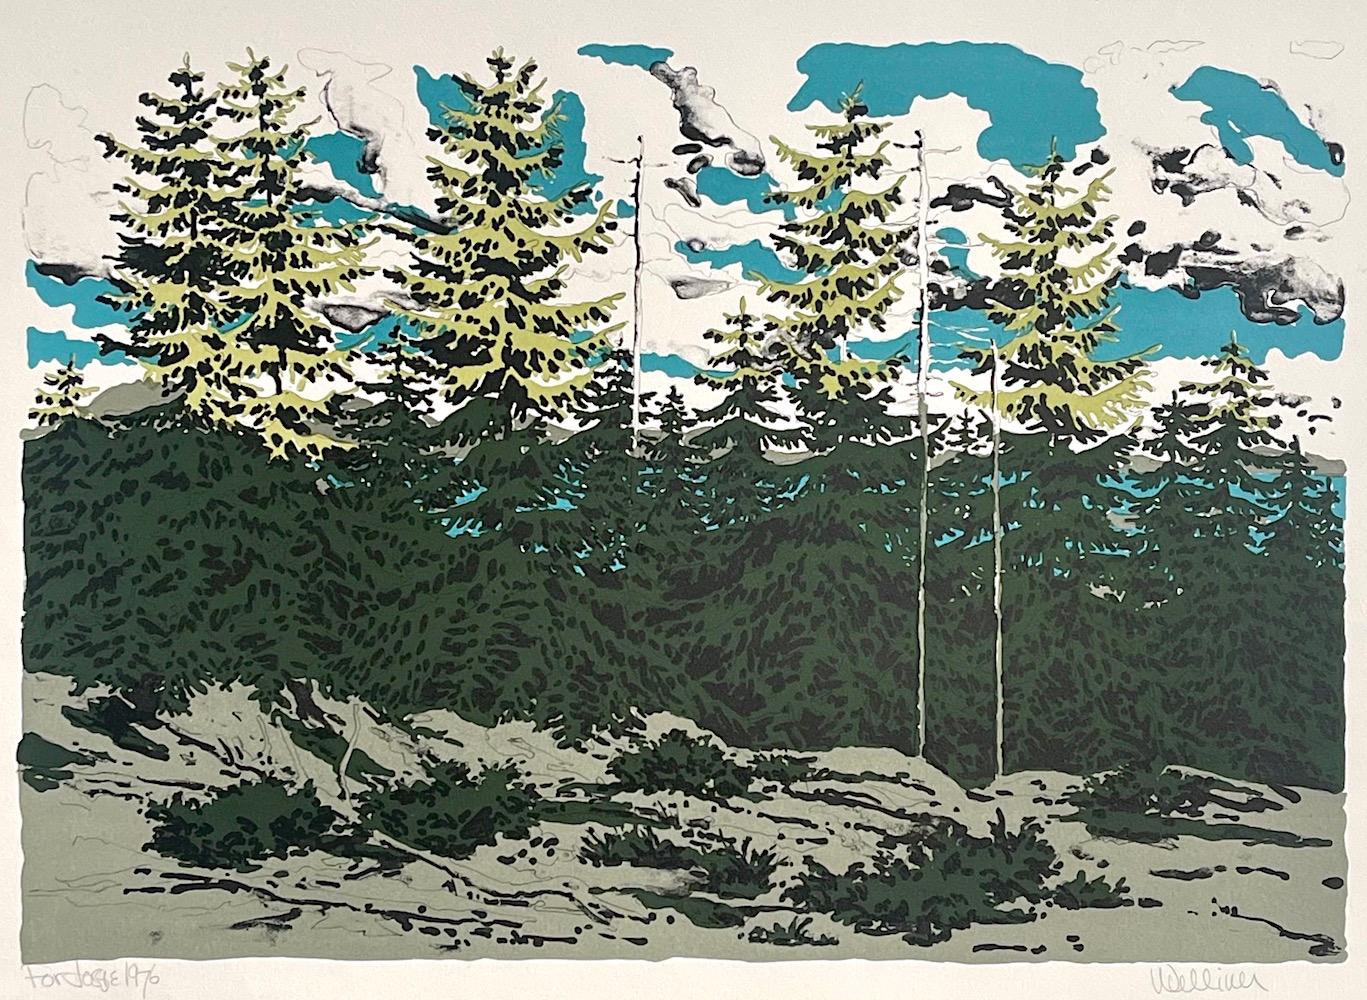 Neil Welliver Print - FROM ZEKE'S PLACE Signed Lithograph, Maine Landscape, Pine Trees Blue Sky Clouds